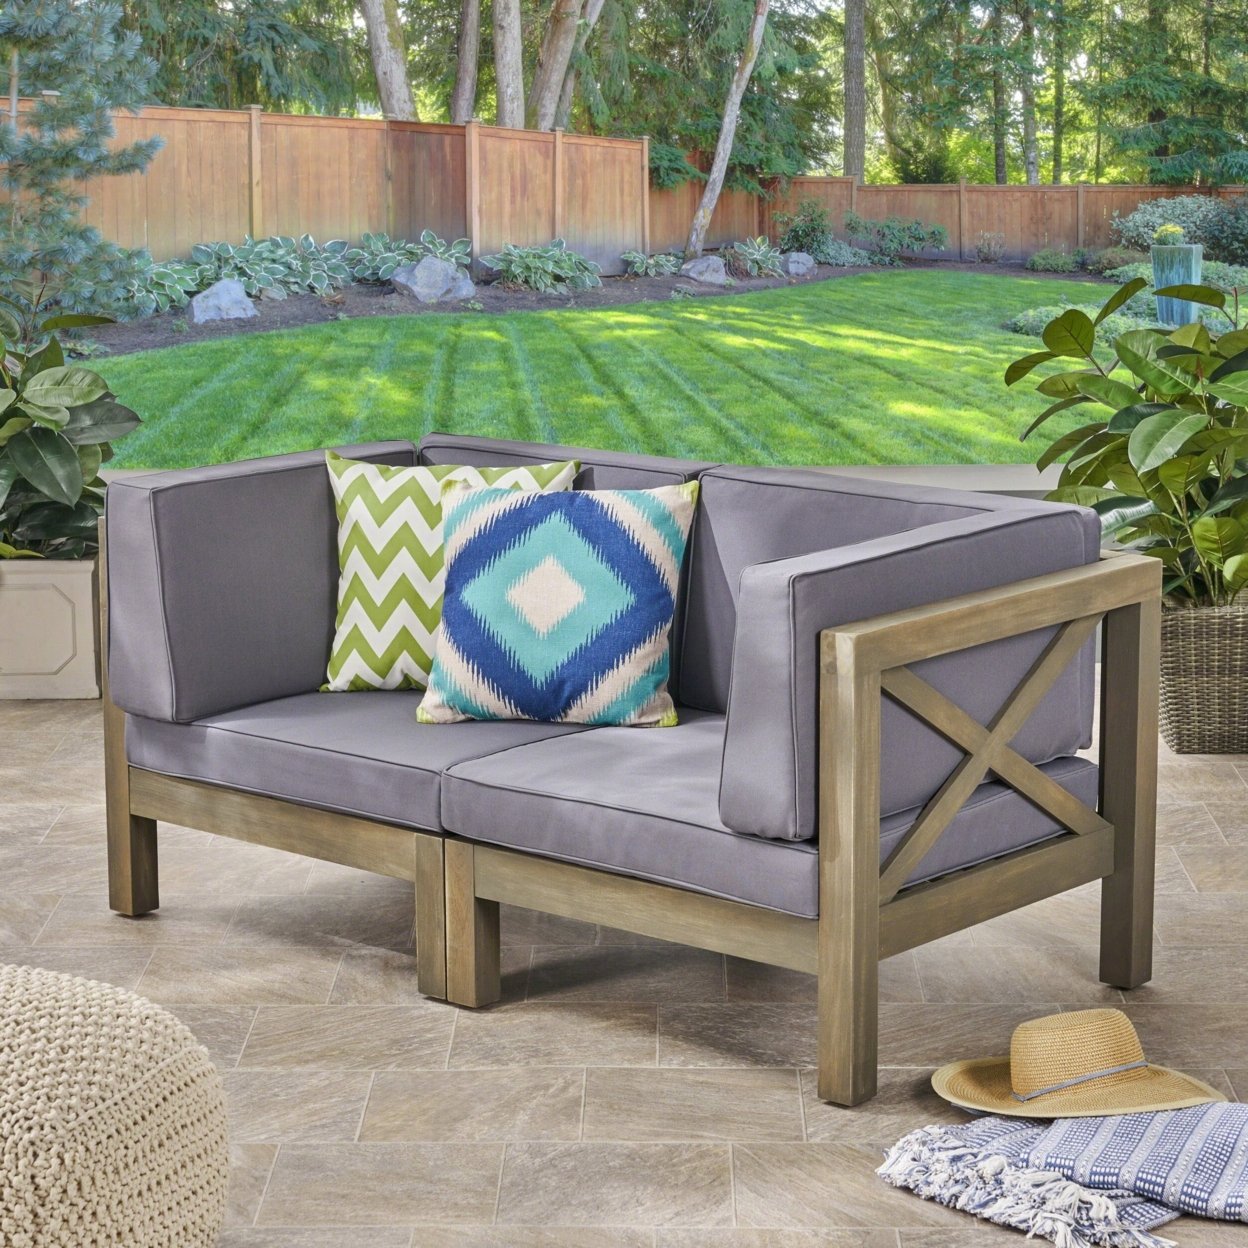 Great Deal Furniture Keith Outdoor Sectional Loveseat Set 2-Seater Acacia Wood Water-Resistant Cushions - White